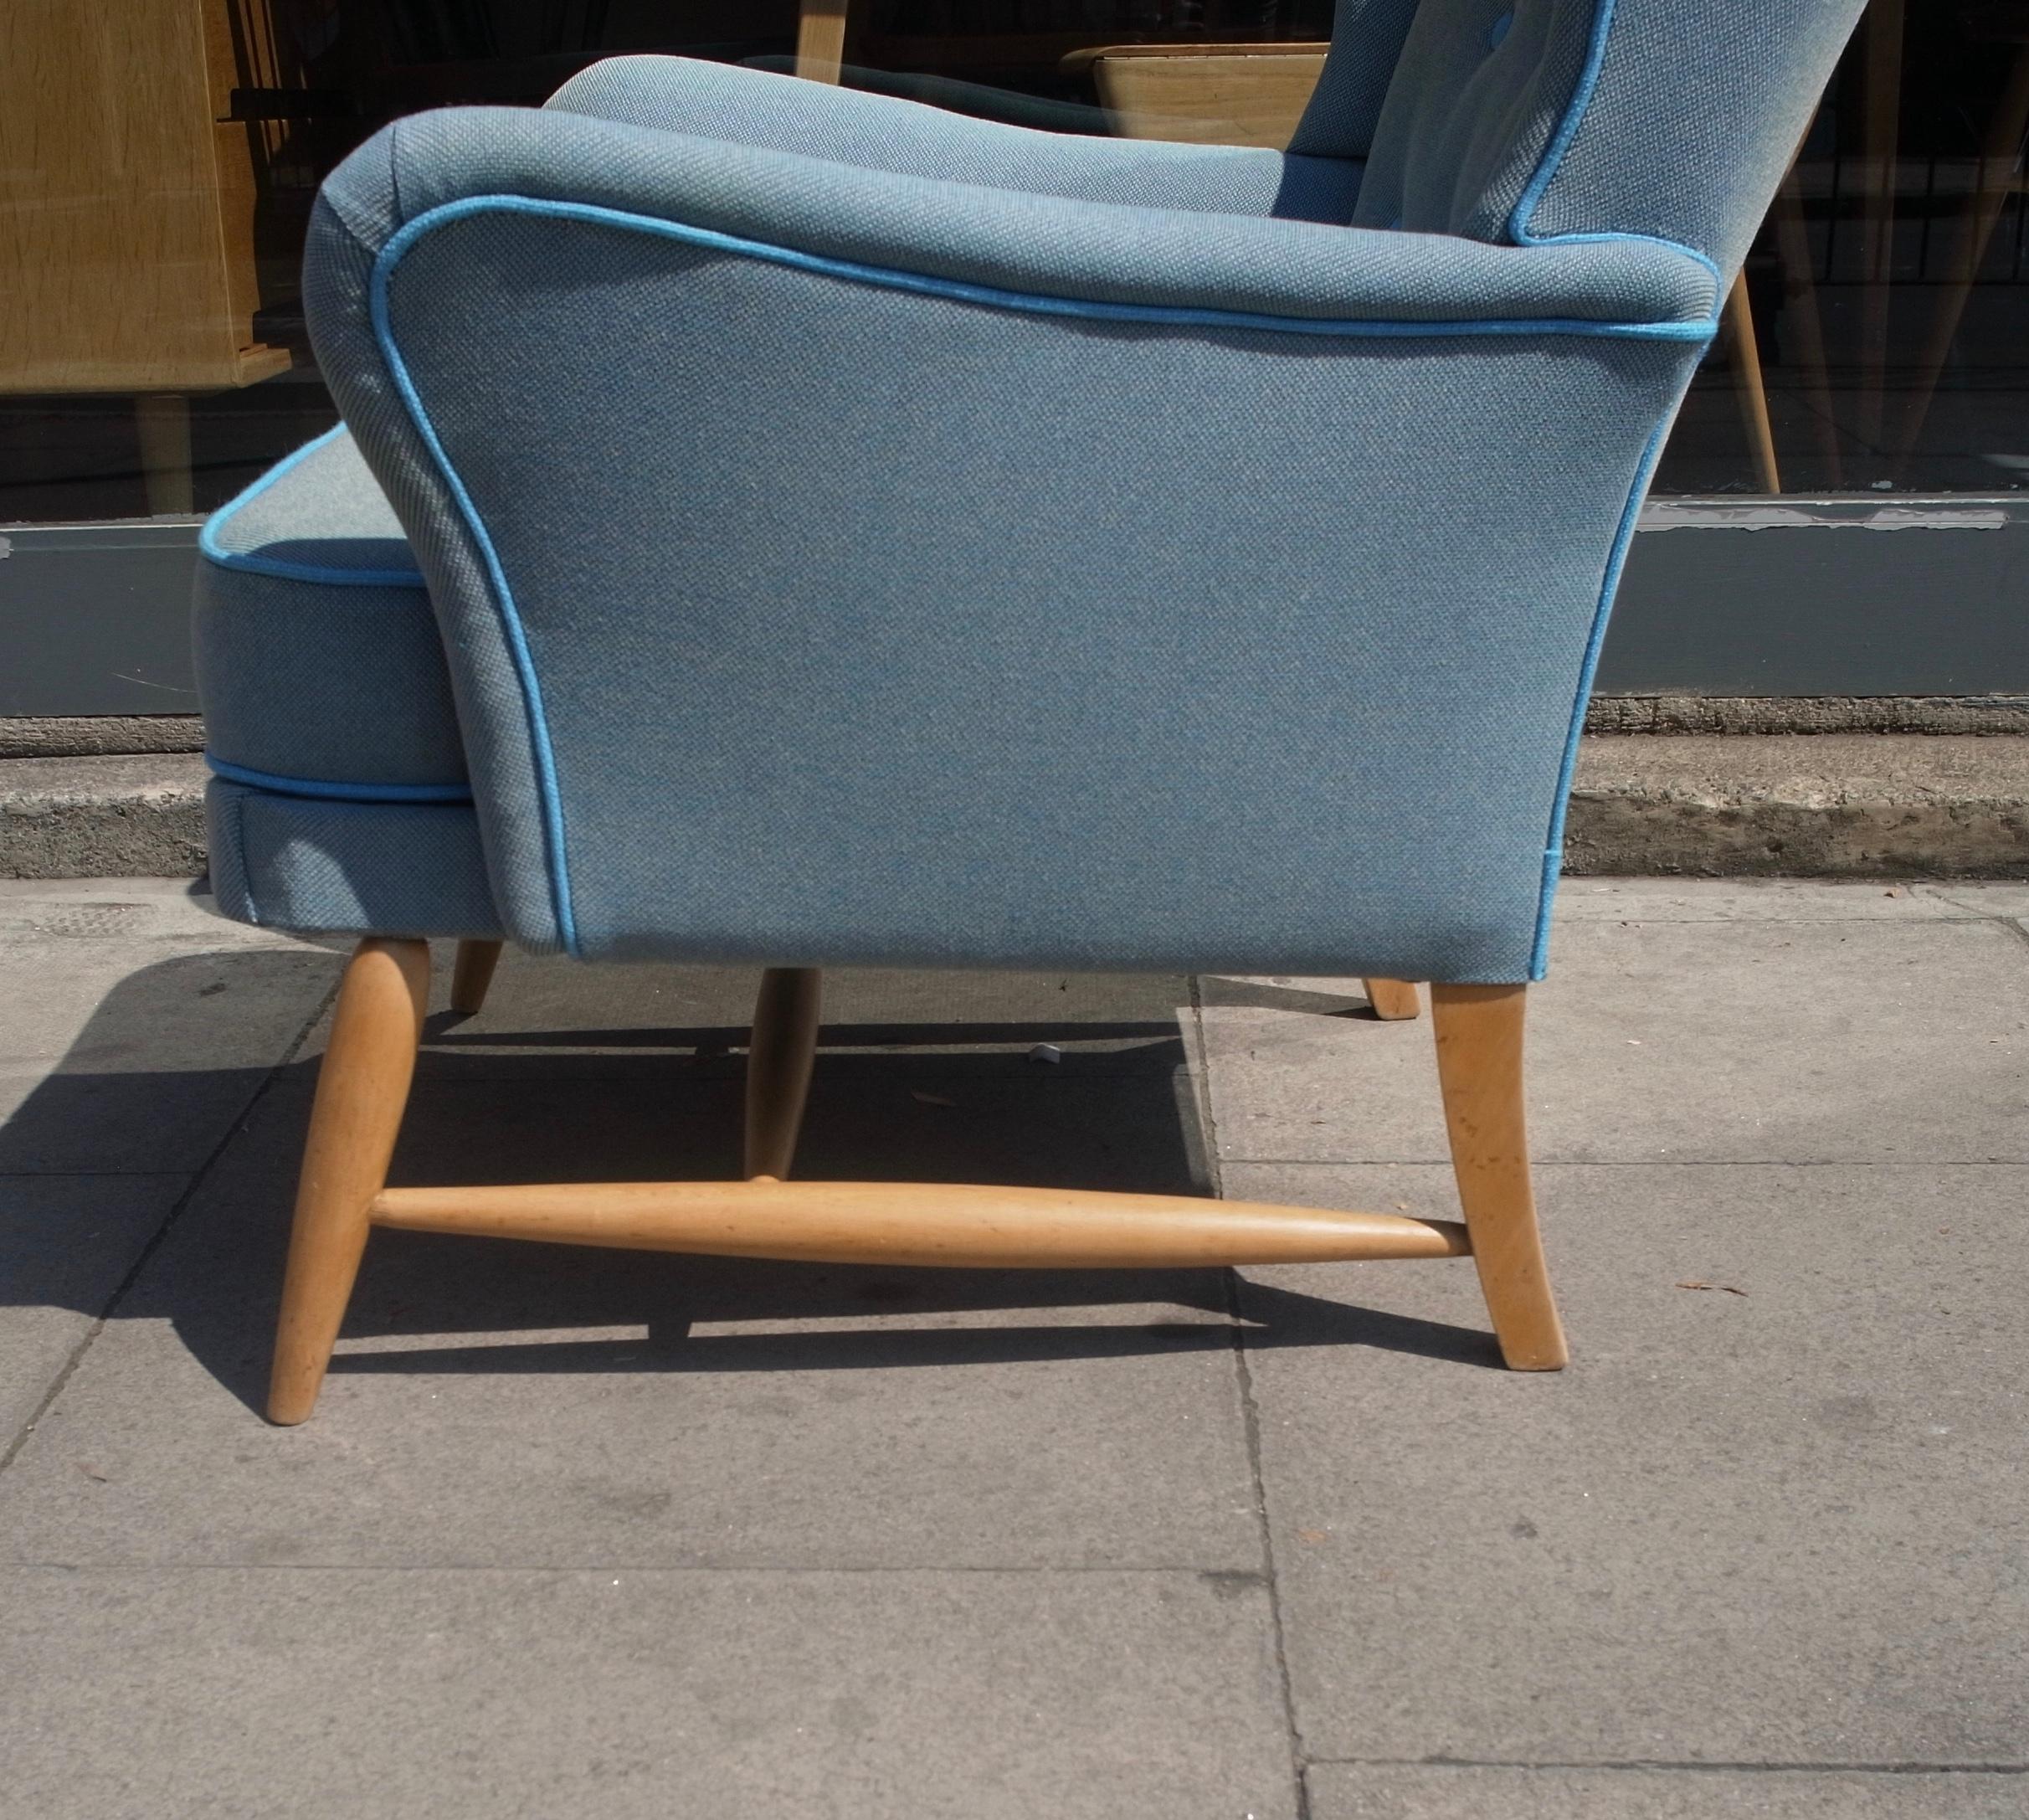 Mid-20th Century Rare Vintage 1950s Ercol Wingback Armchair Upholstered in Blue Wool Textile